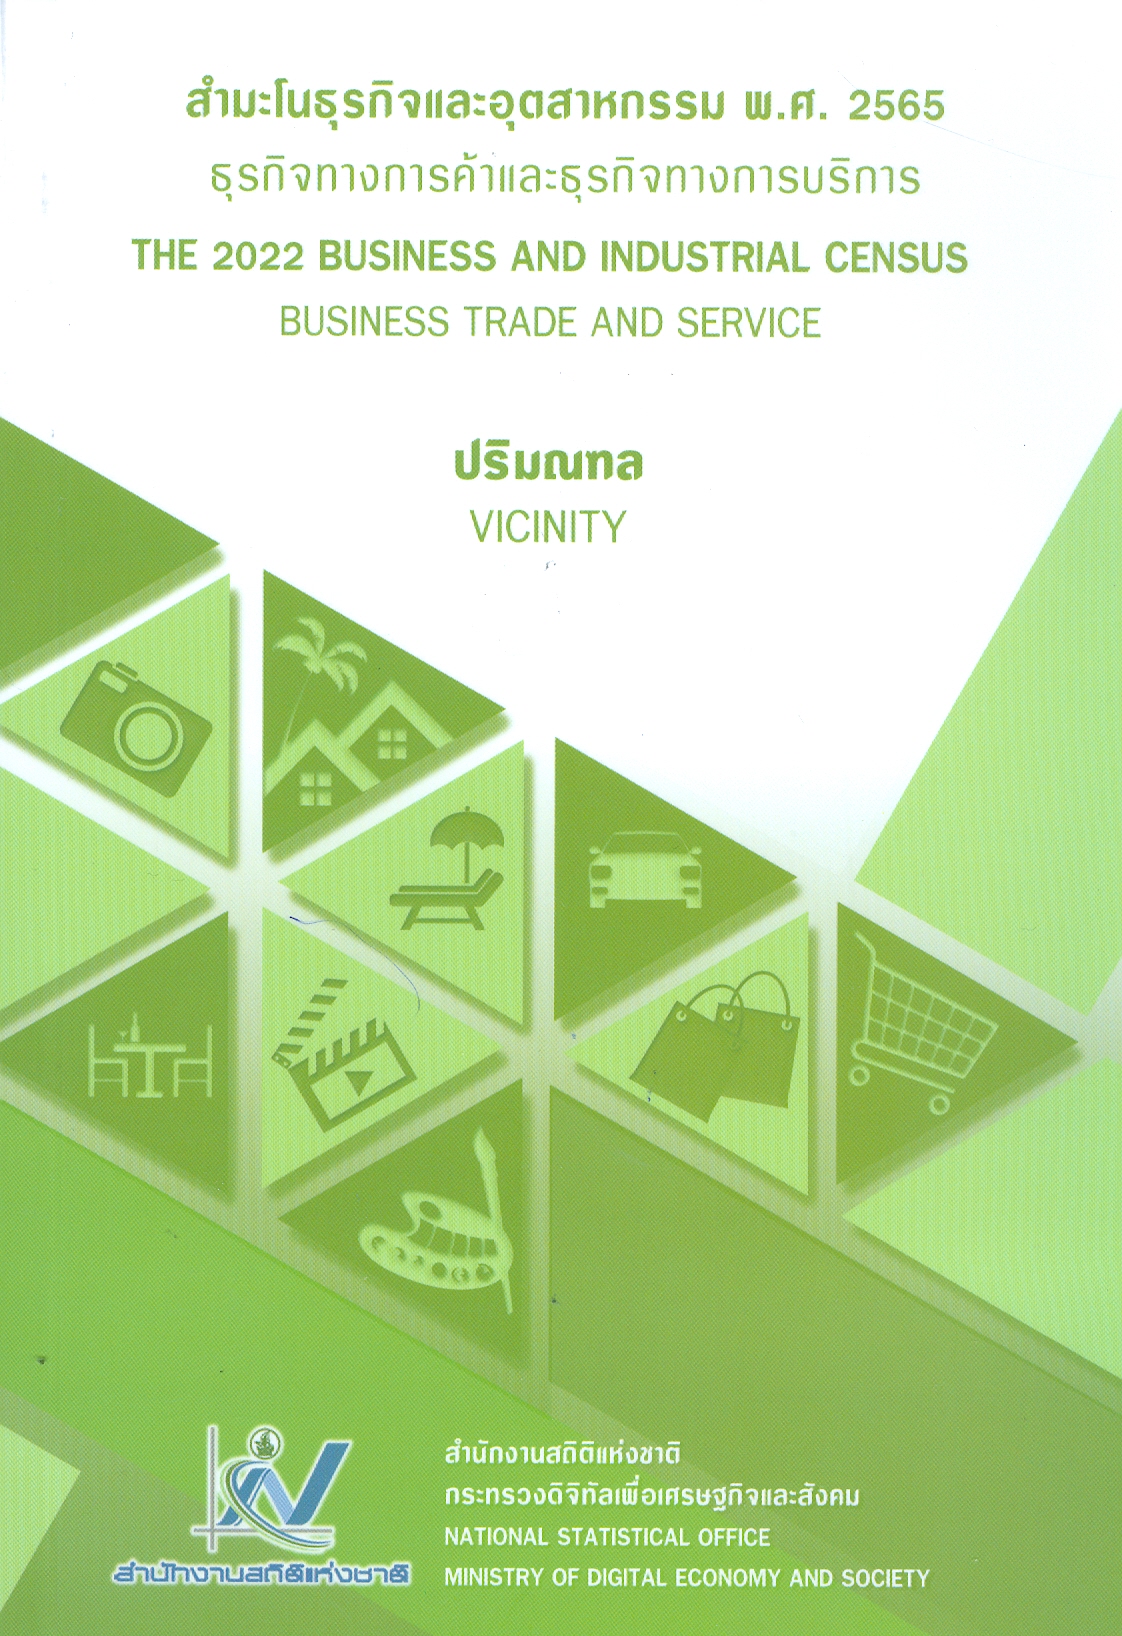 The Business and Industrial Census 2012 : Trade and Services Industry 2022  VICINITY